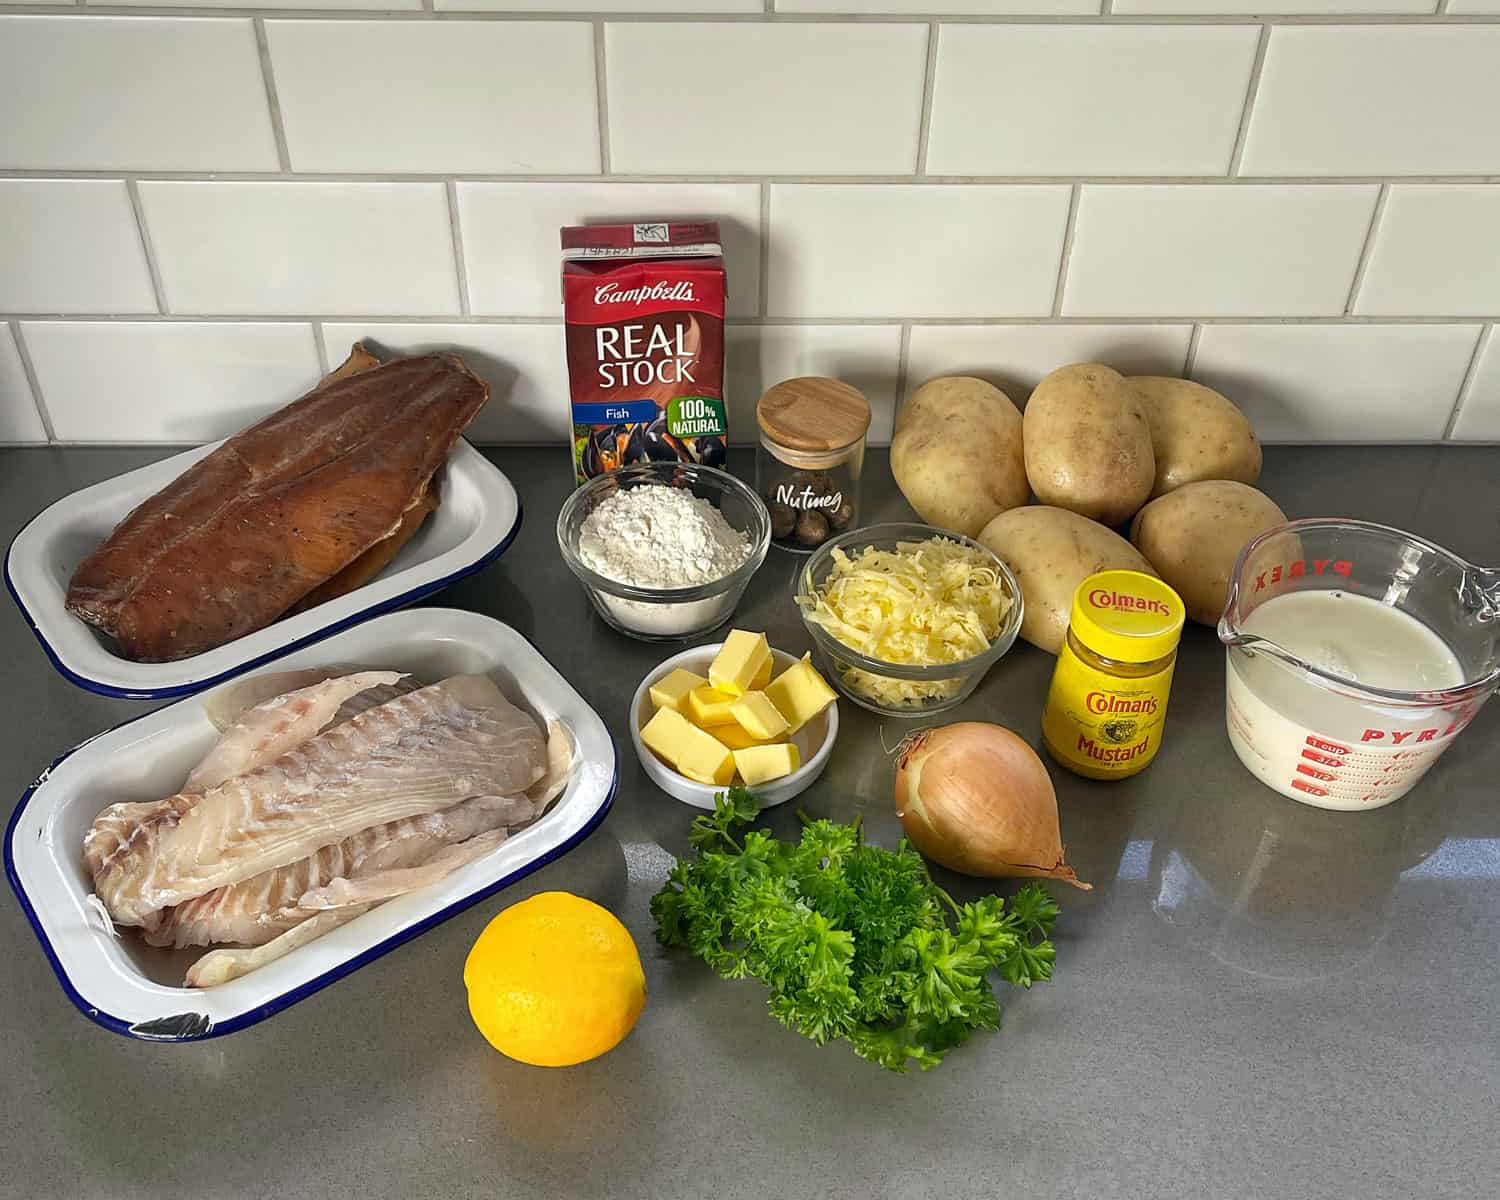 Ingredients for Smoked Fish pie on a grey bench